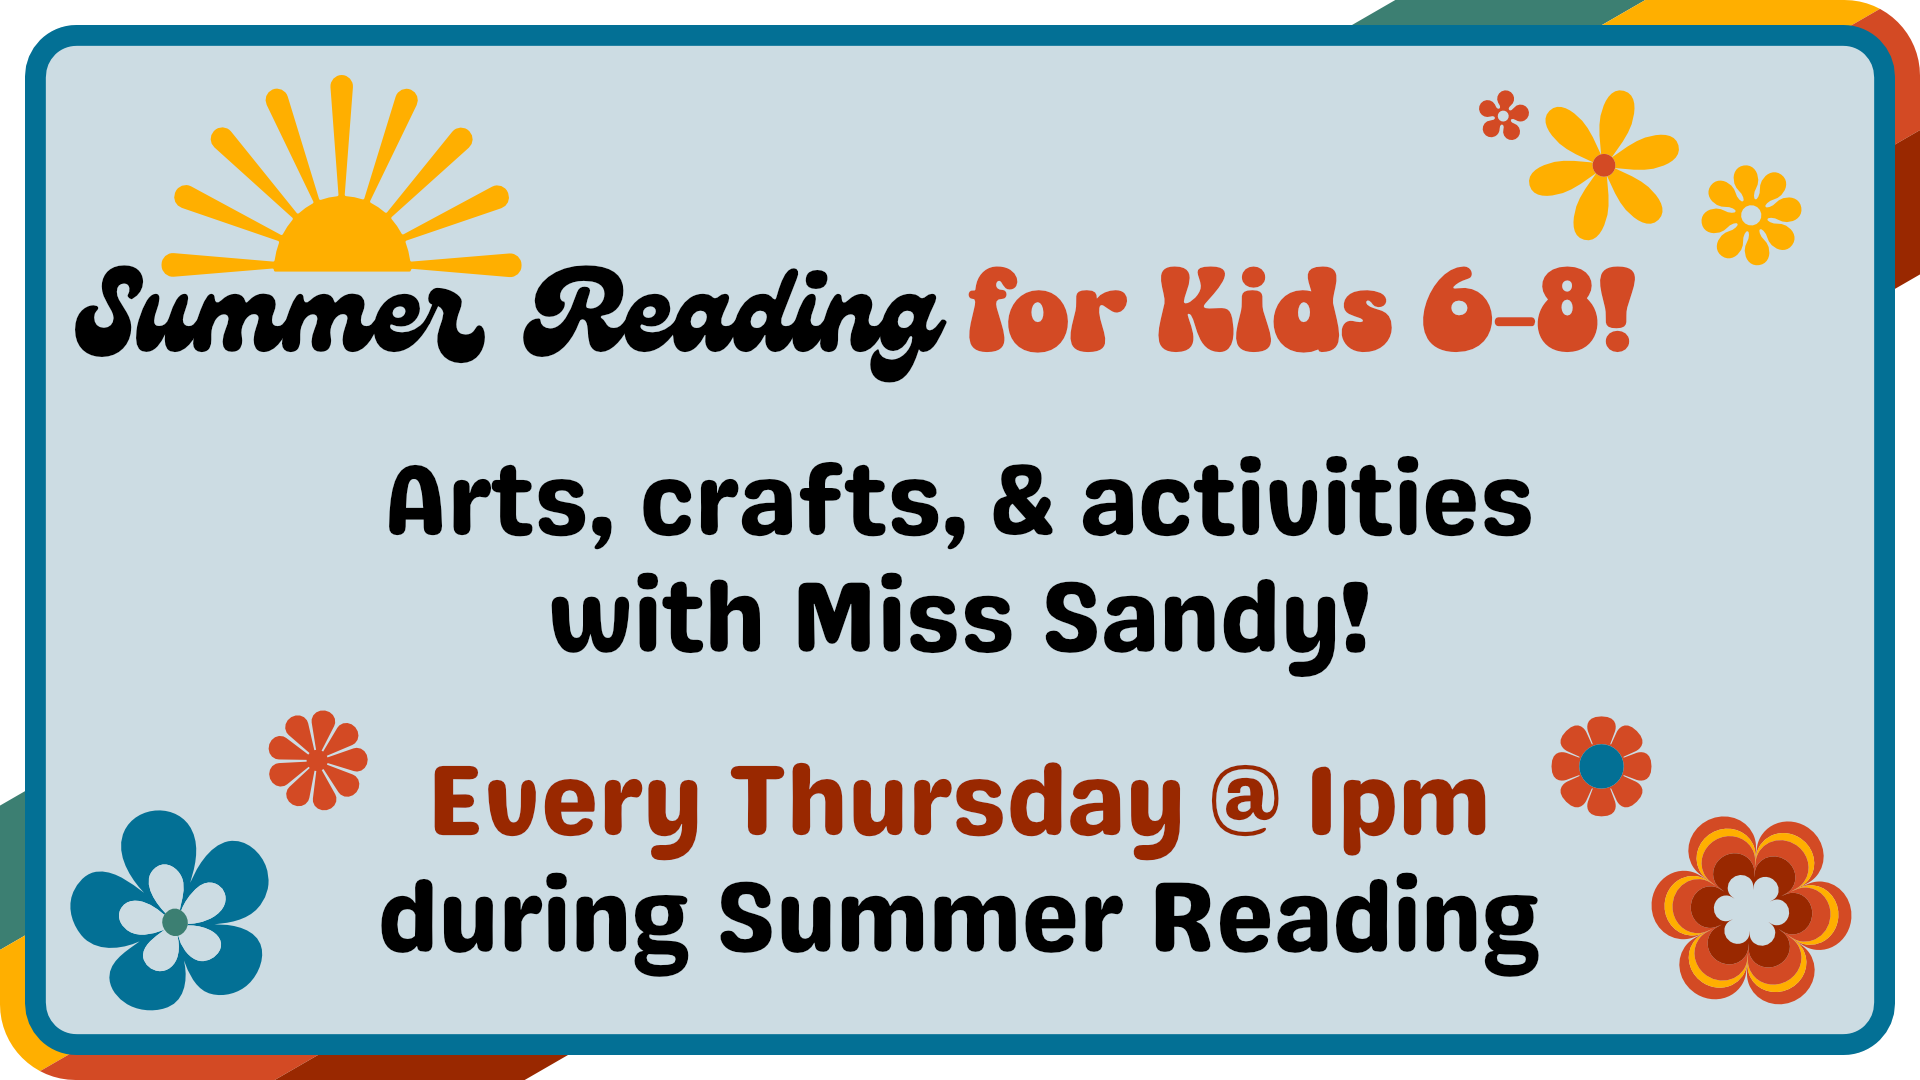 Summer Reading for kids 6-8, every Thursday at 1pm